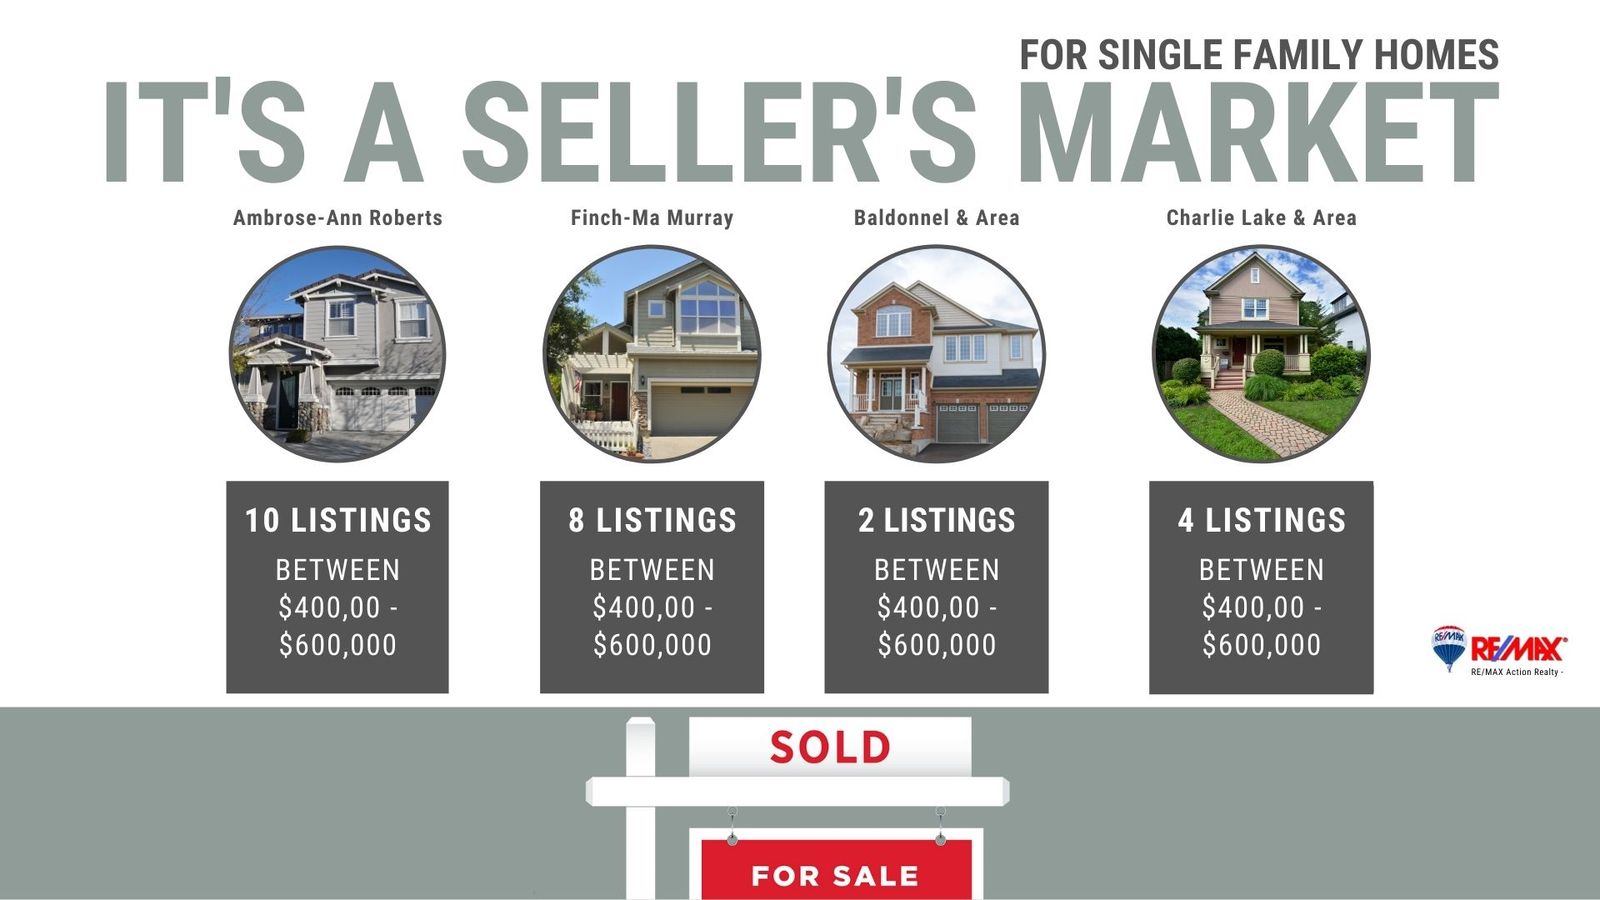 It's A Seller's Market For Single Family Homes